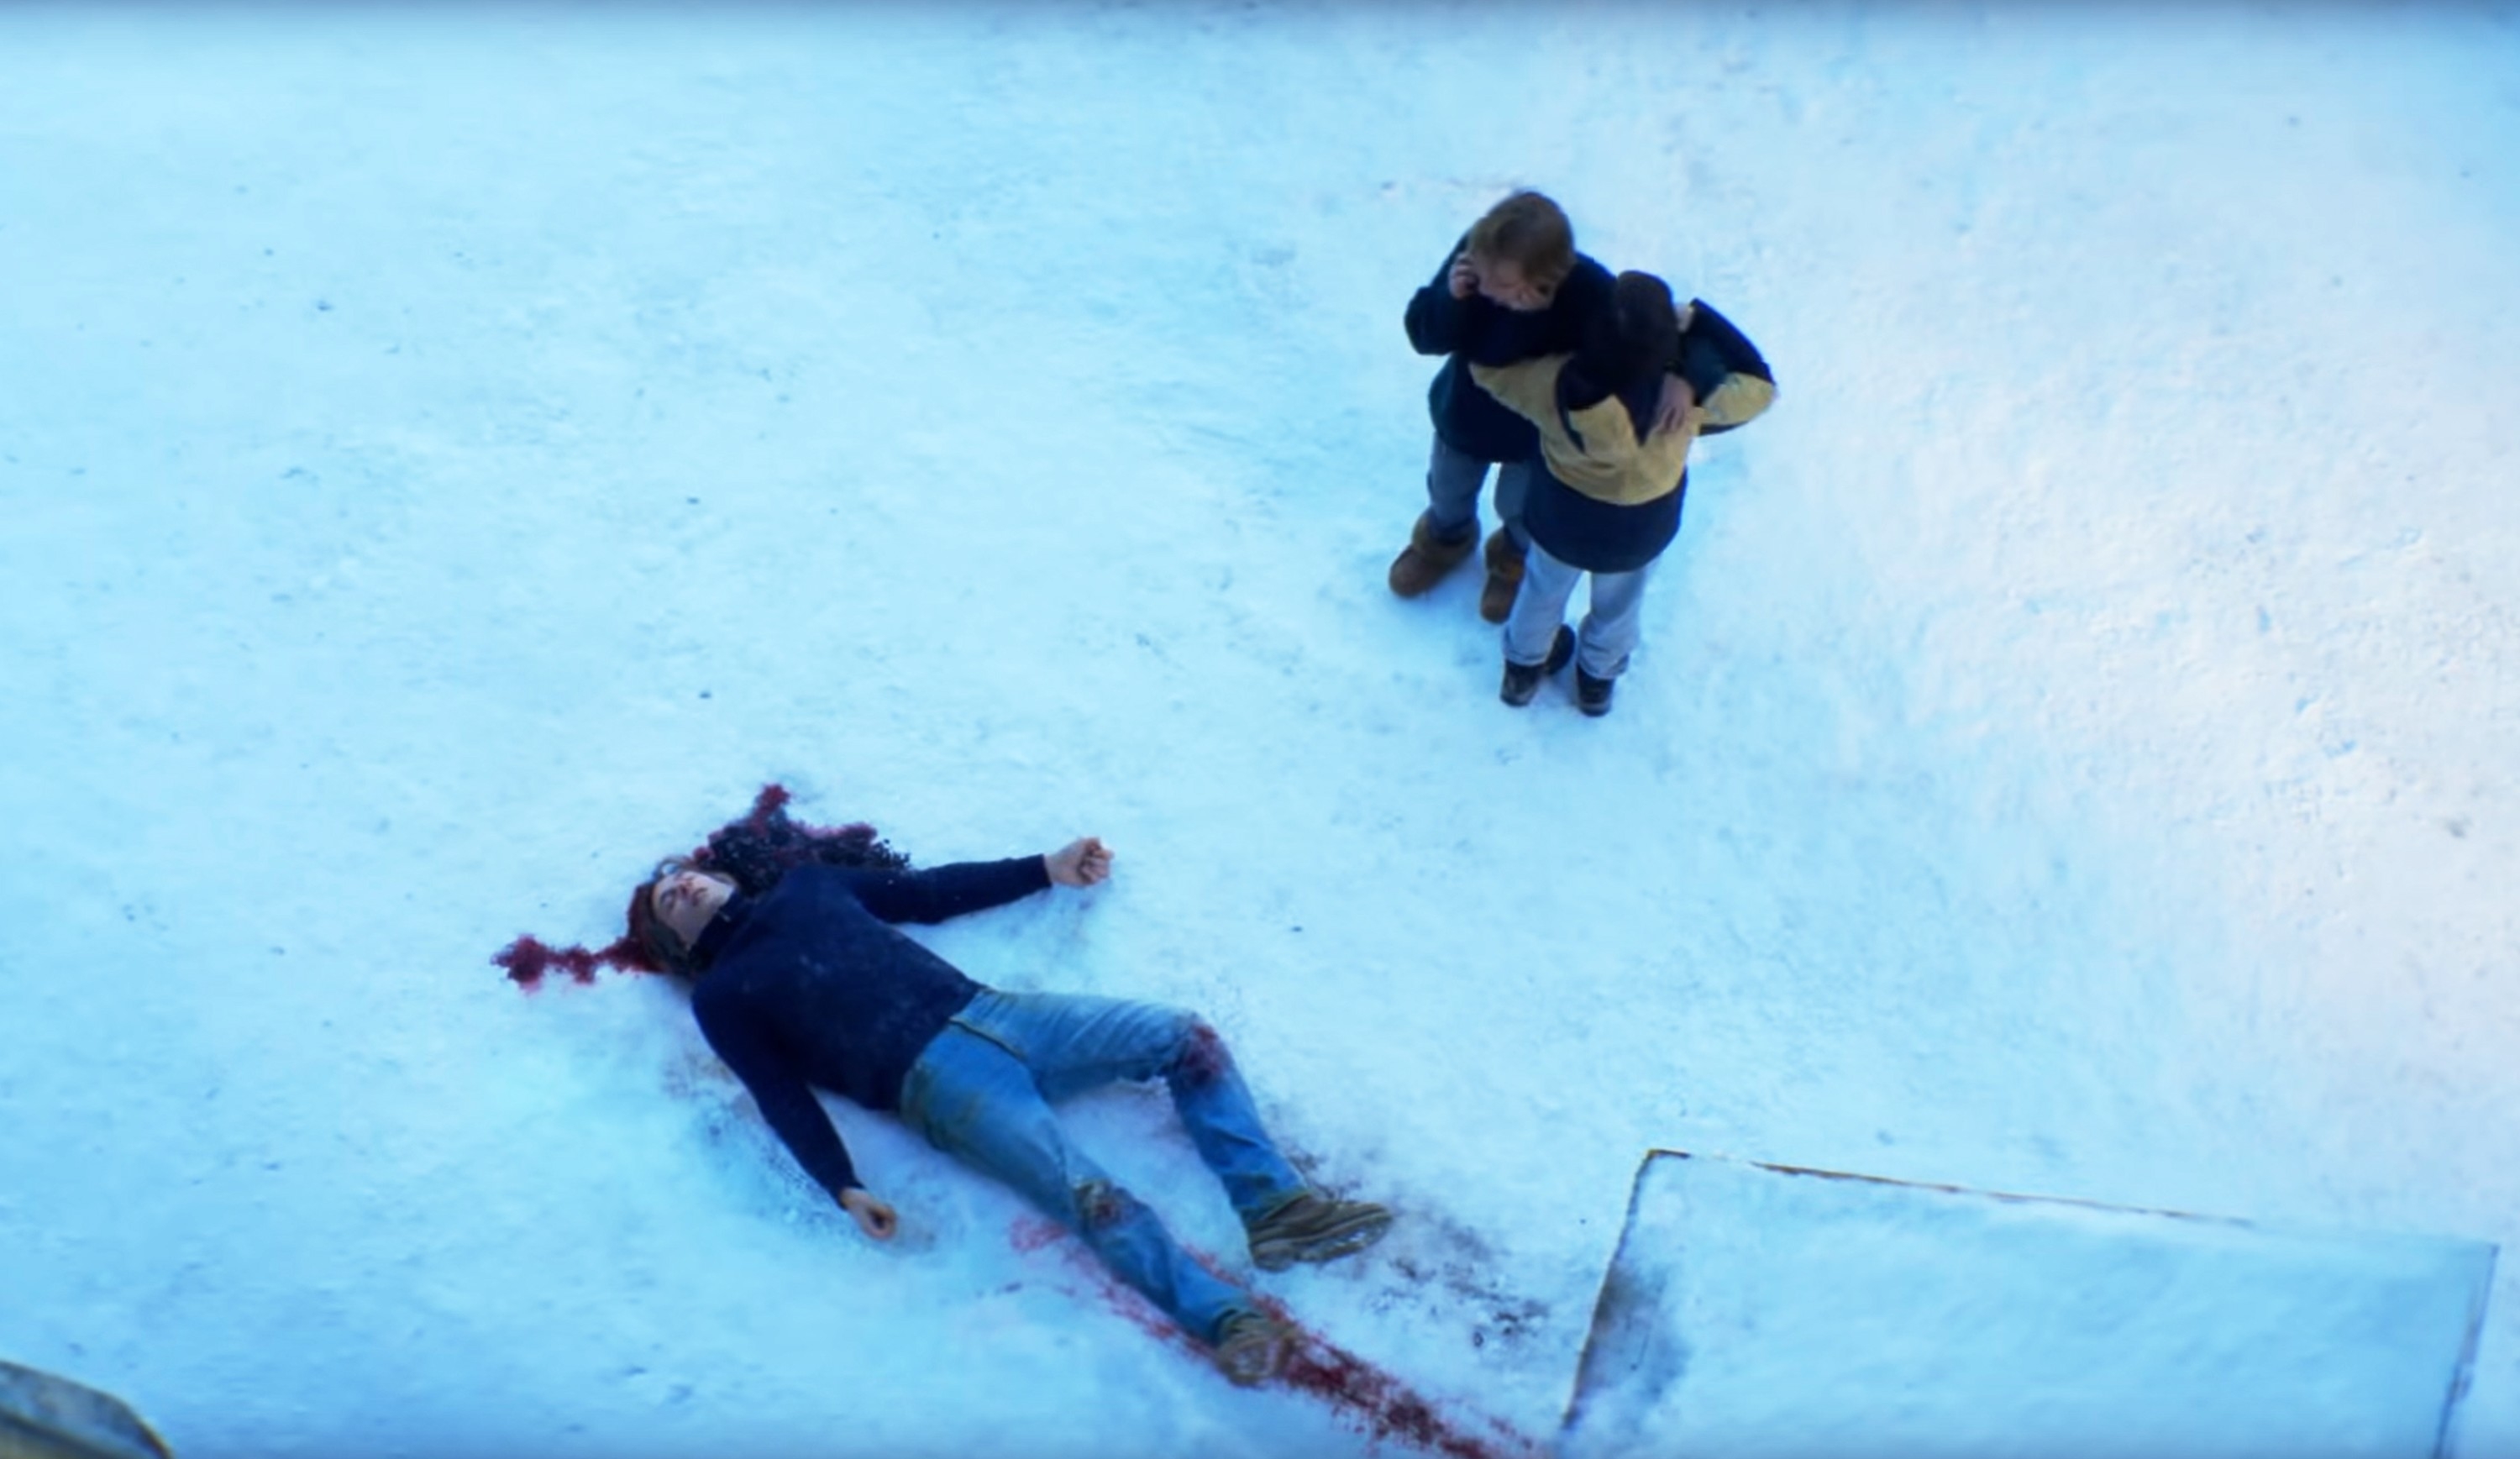 Two people stand by a dead bloody body in the snow